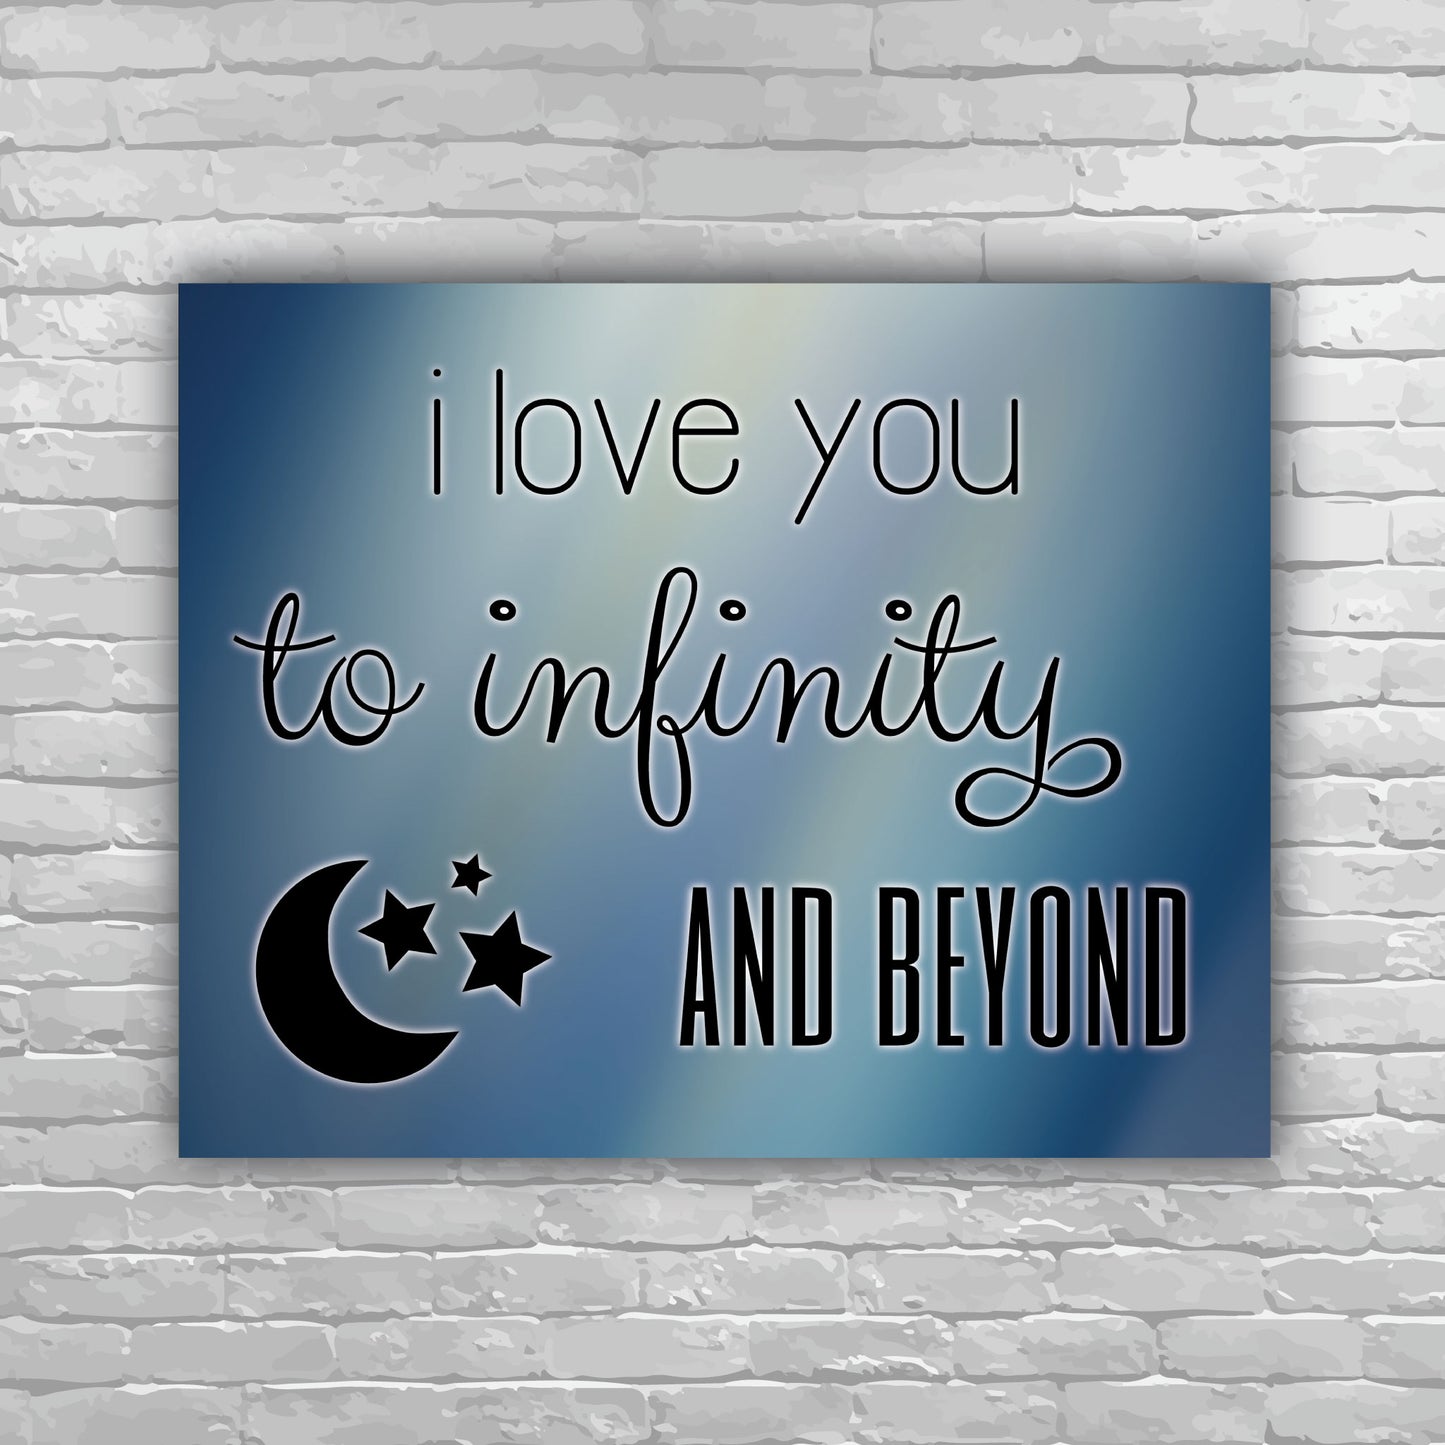 I Love You to Infinity and Beyond, blue background